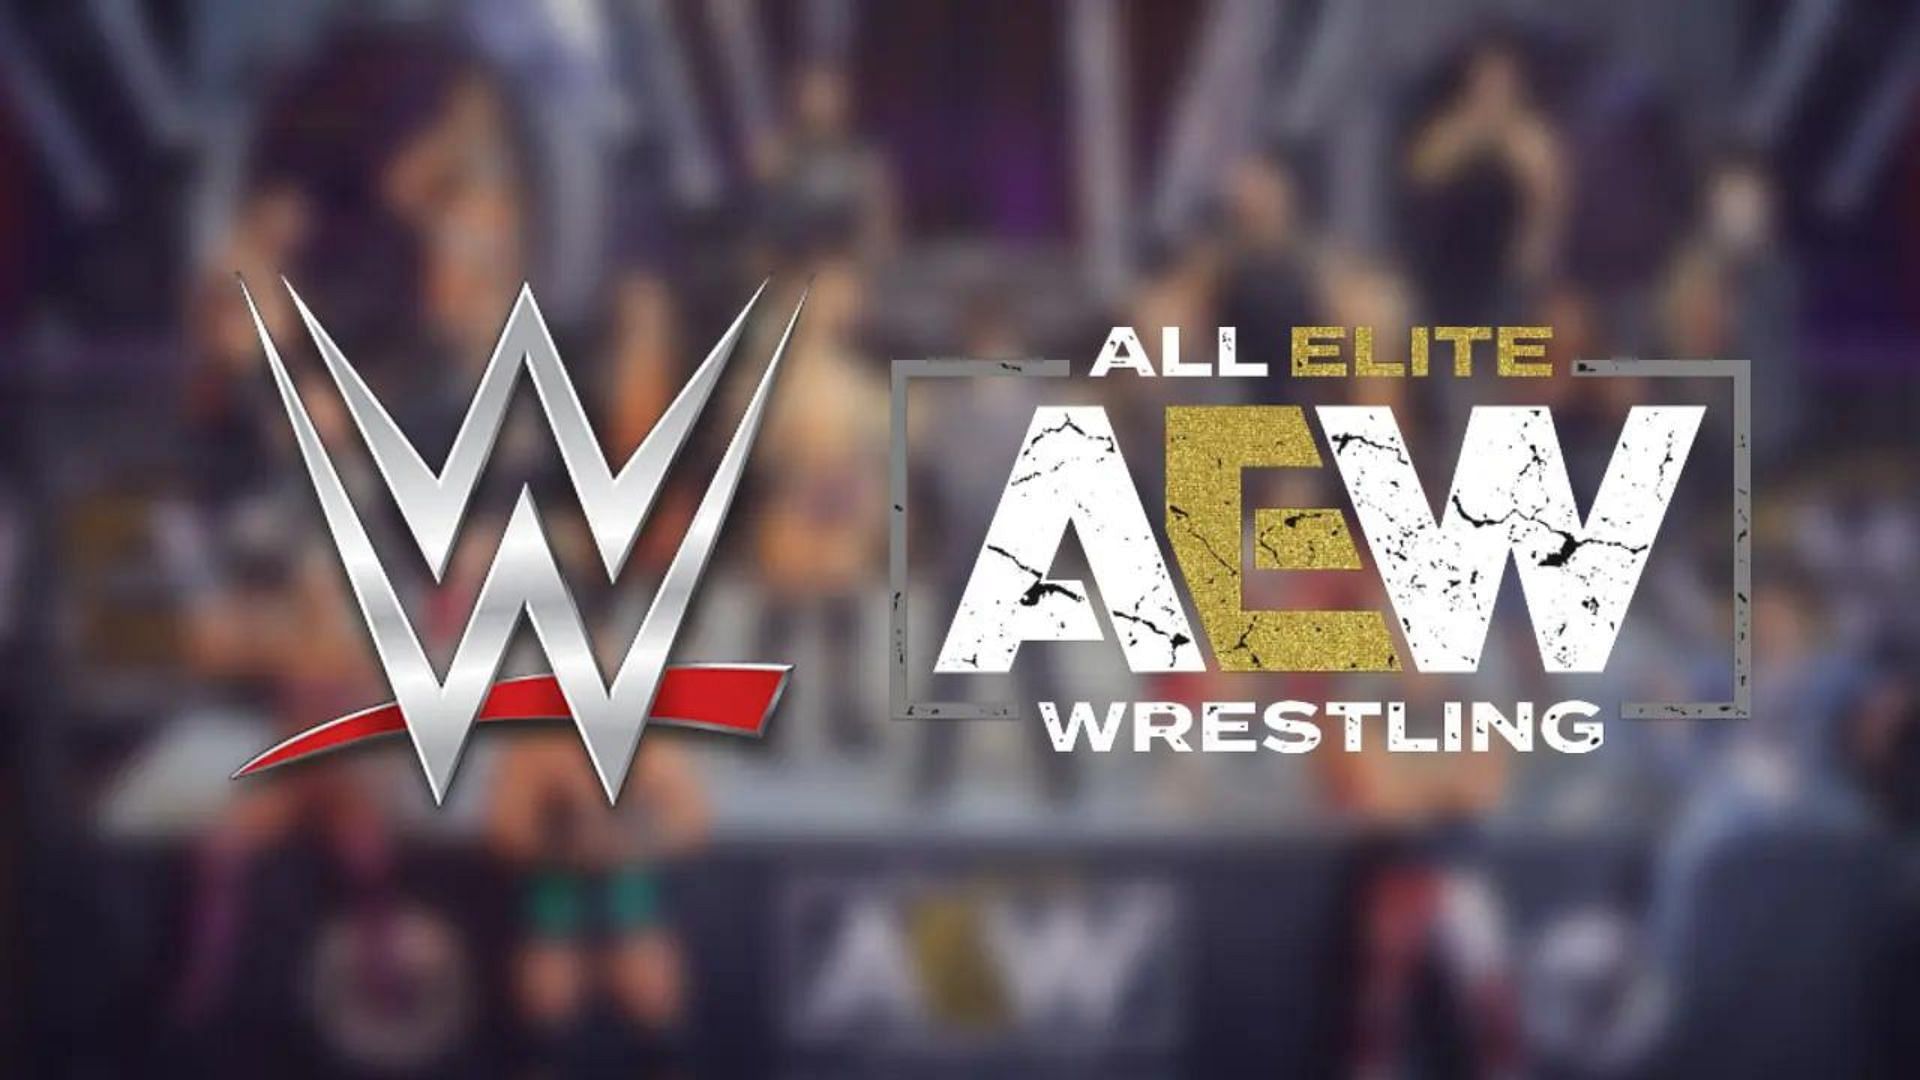 Former WWE NXT star makes AEW debut